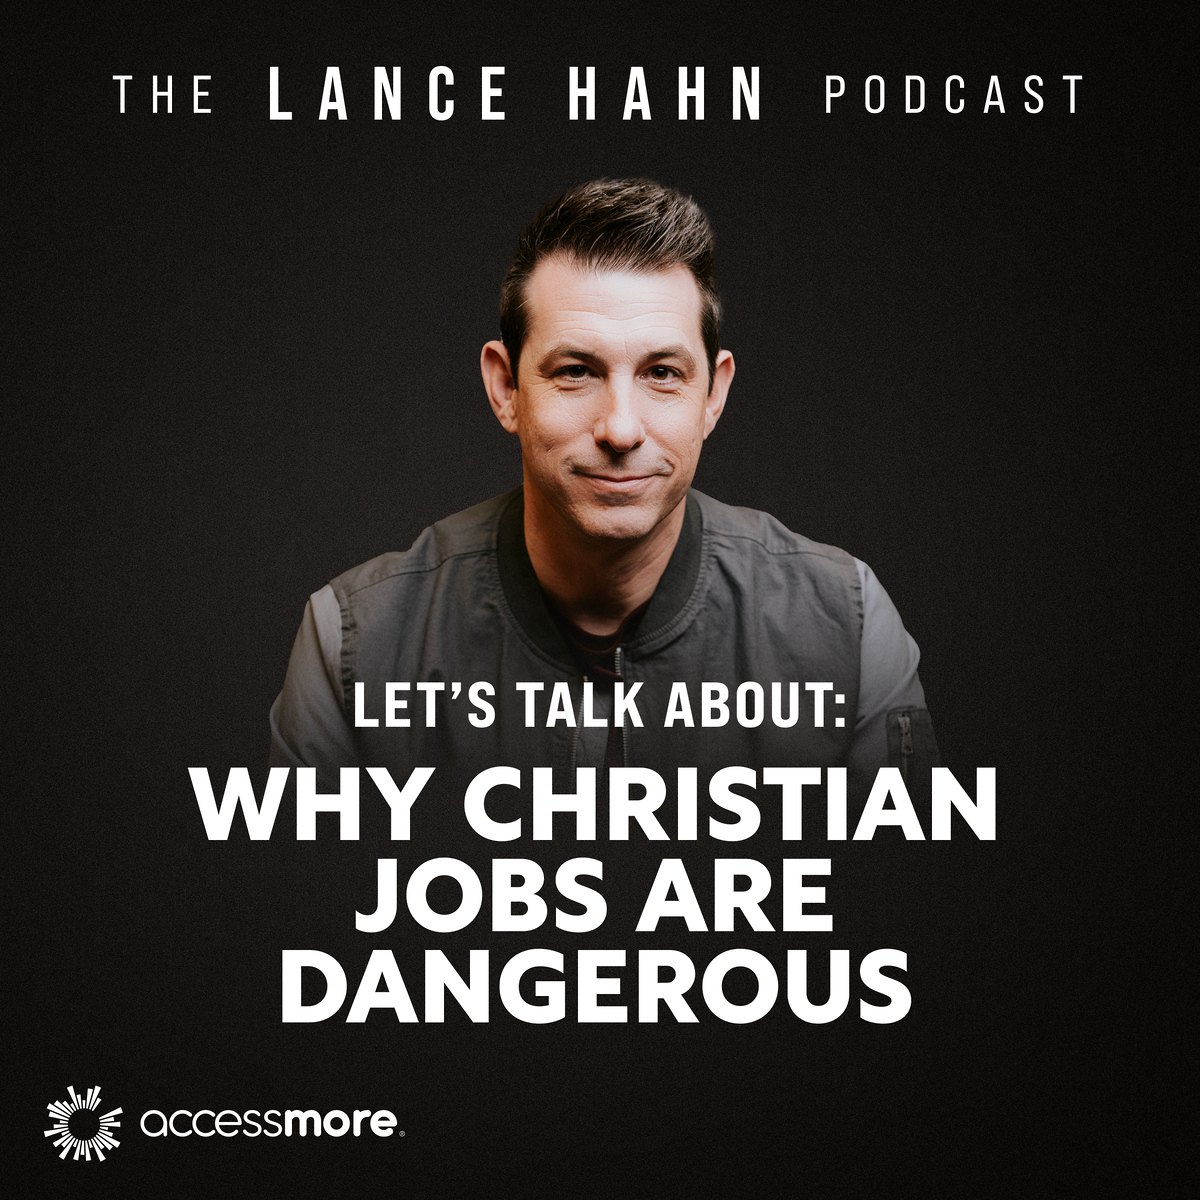 Let's Talk About Why Christian Jobs Are Dangerous